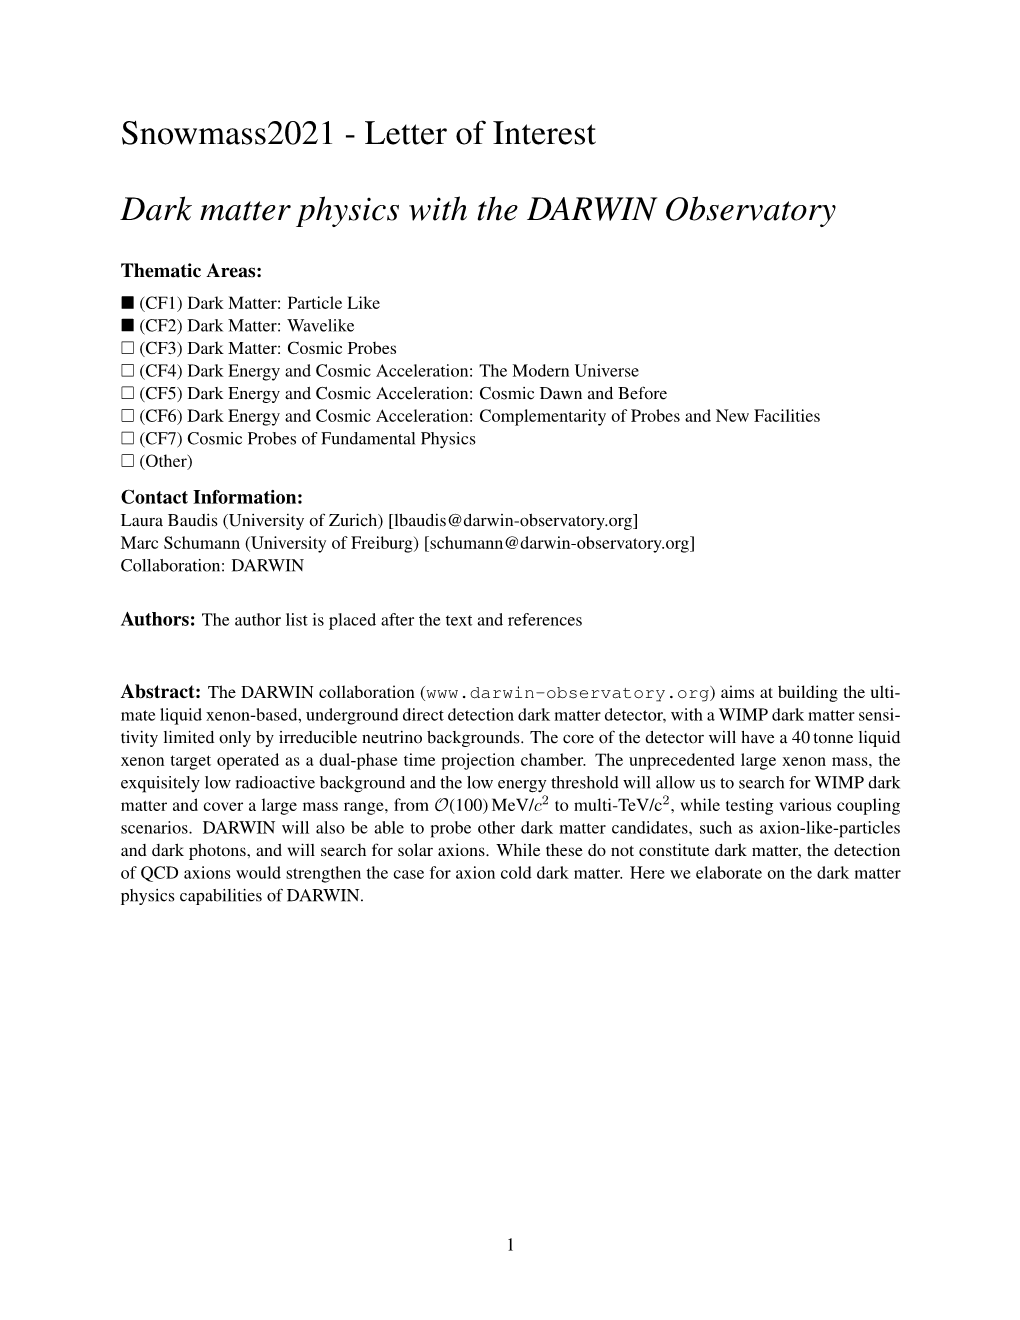 Letter of Interest Dark Matter Physics with the DARWIN Observatory